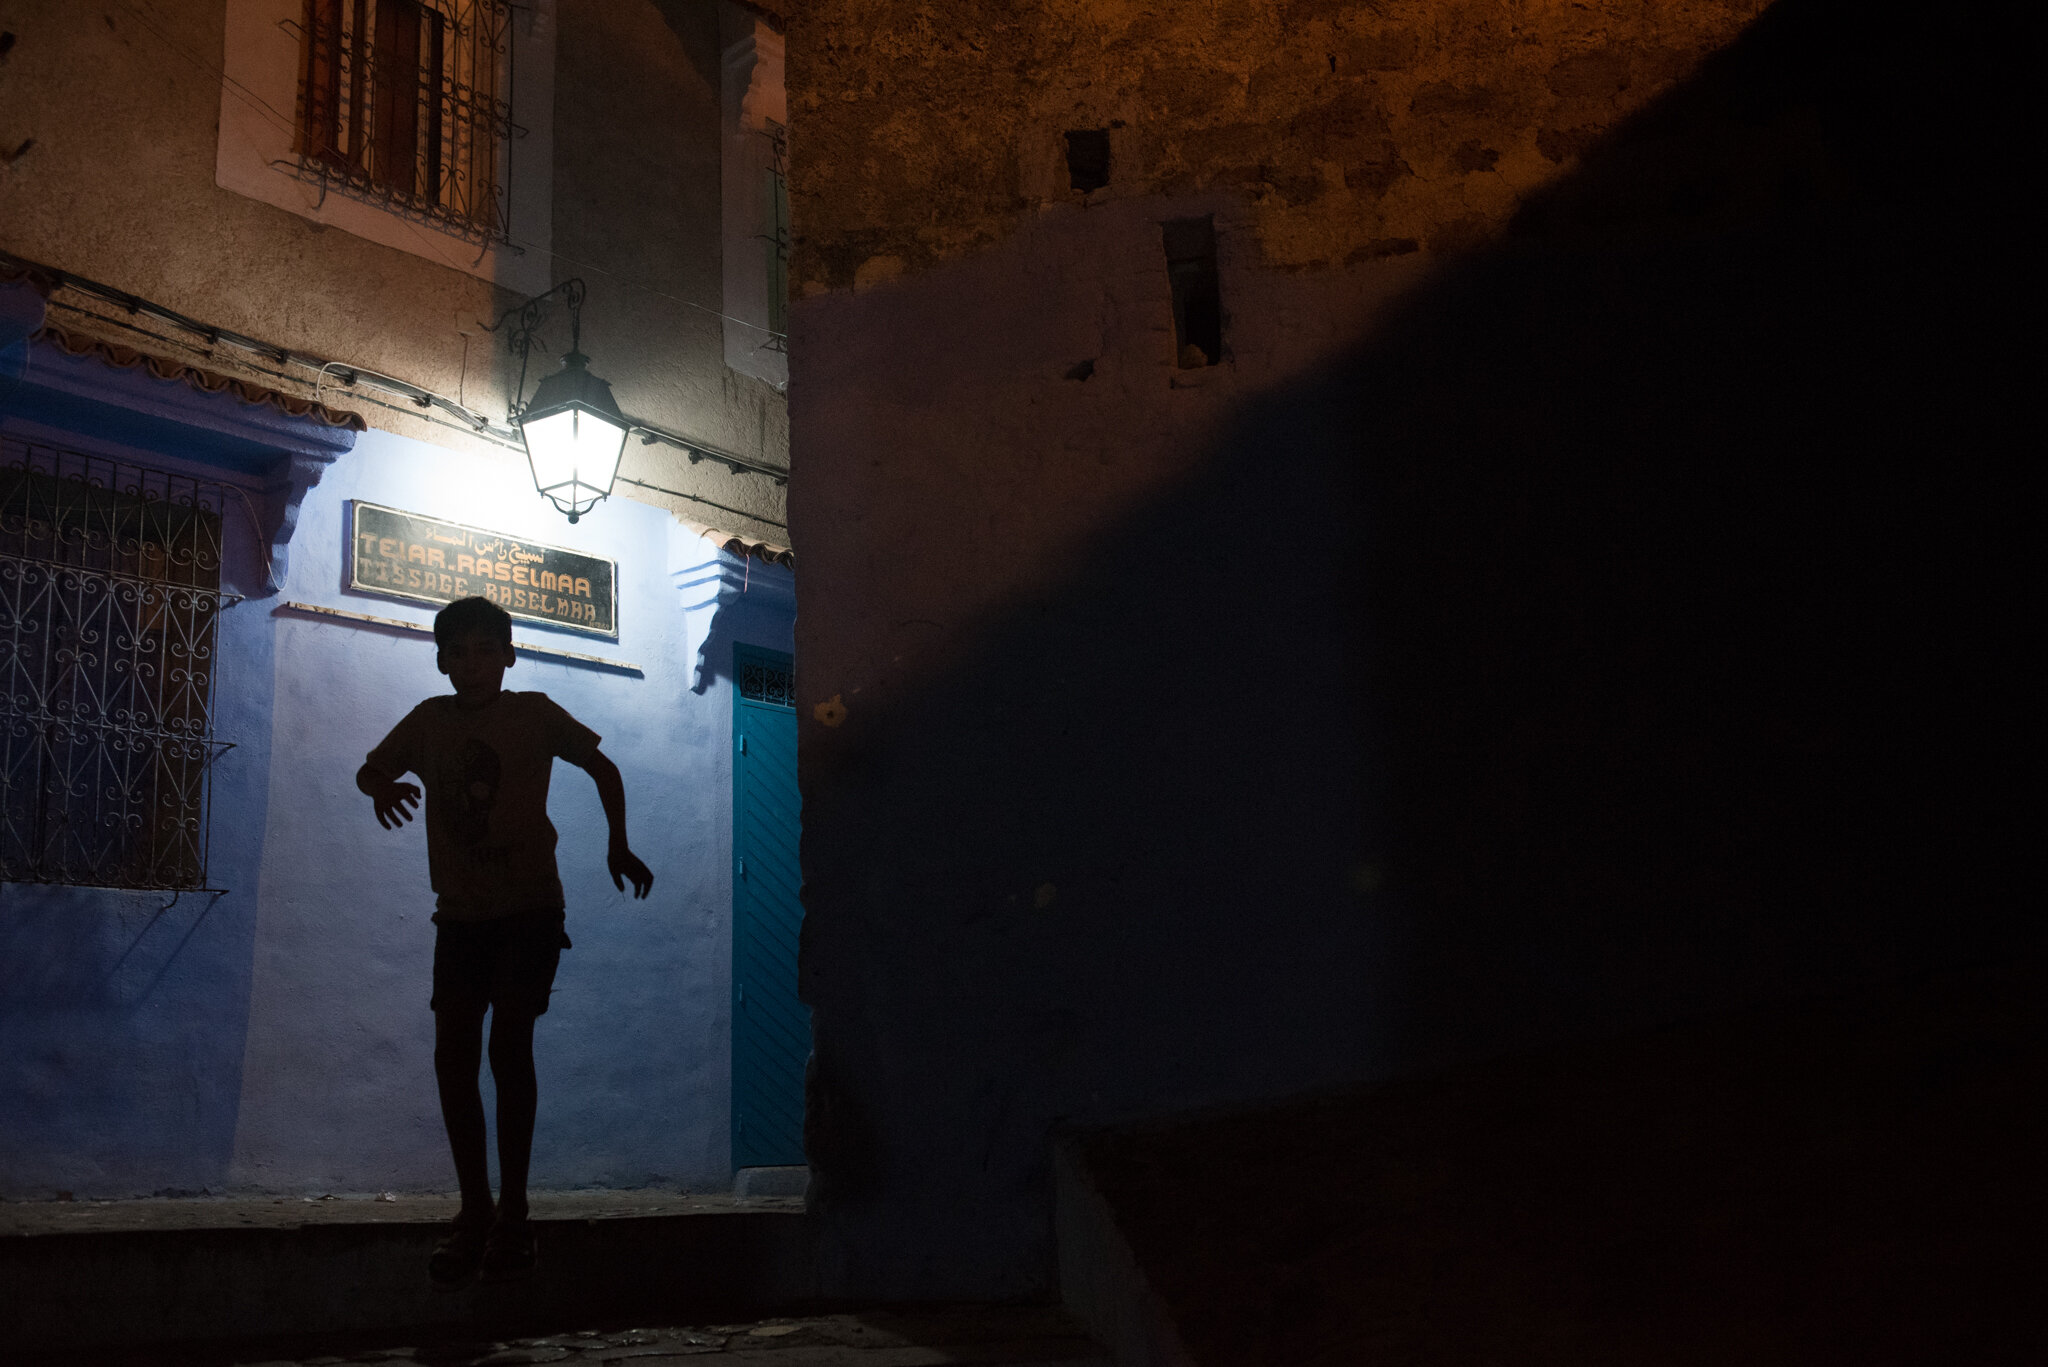    Morocco - Chefchaouen     Boy running through old medina streets at night 